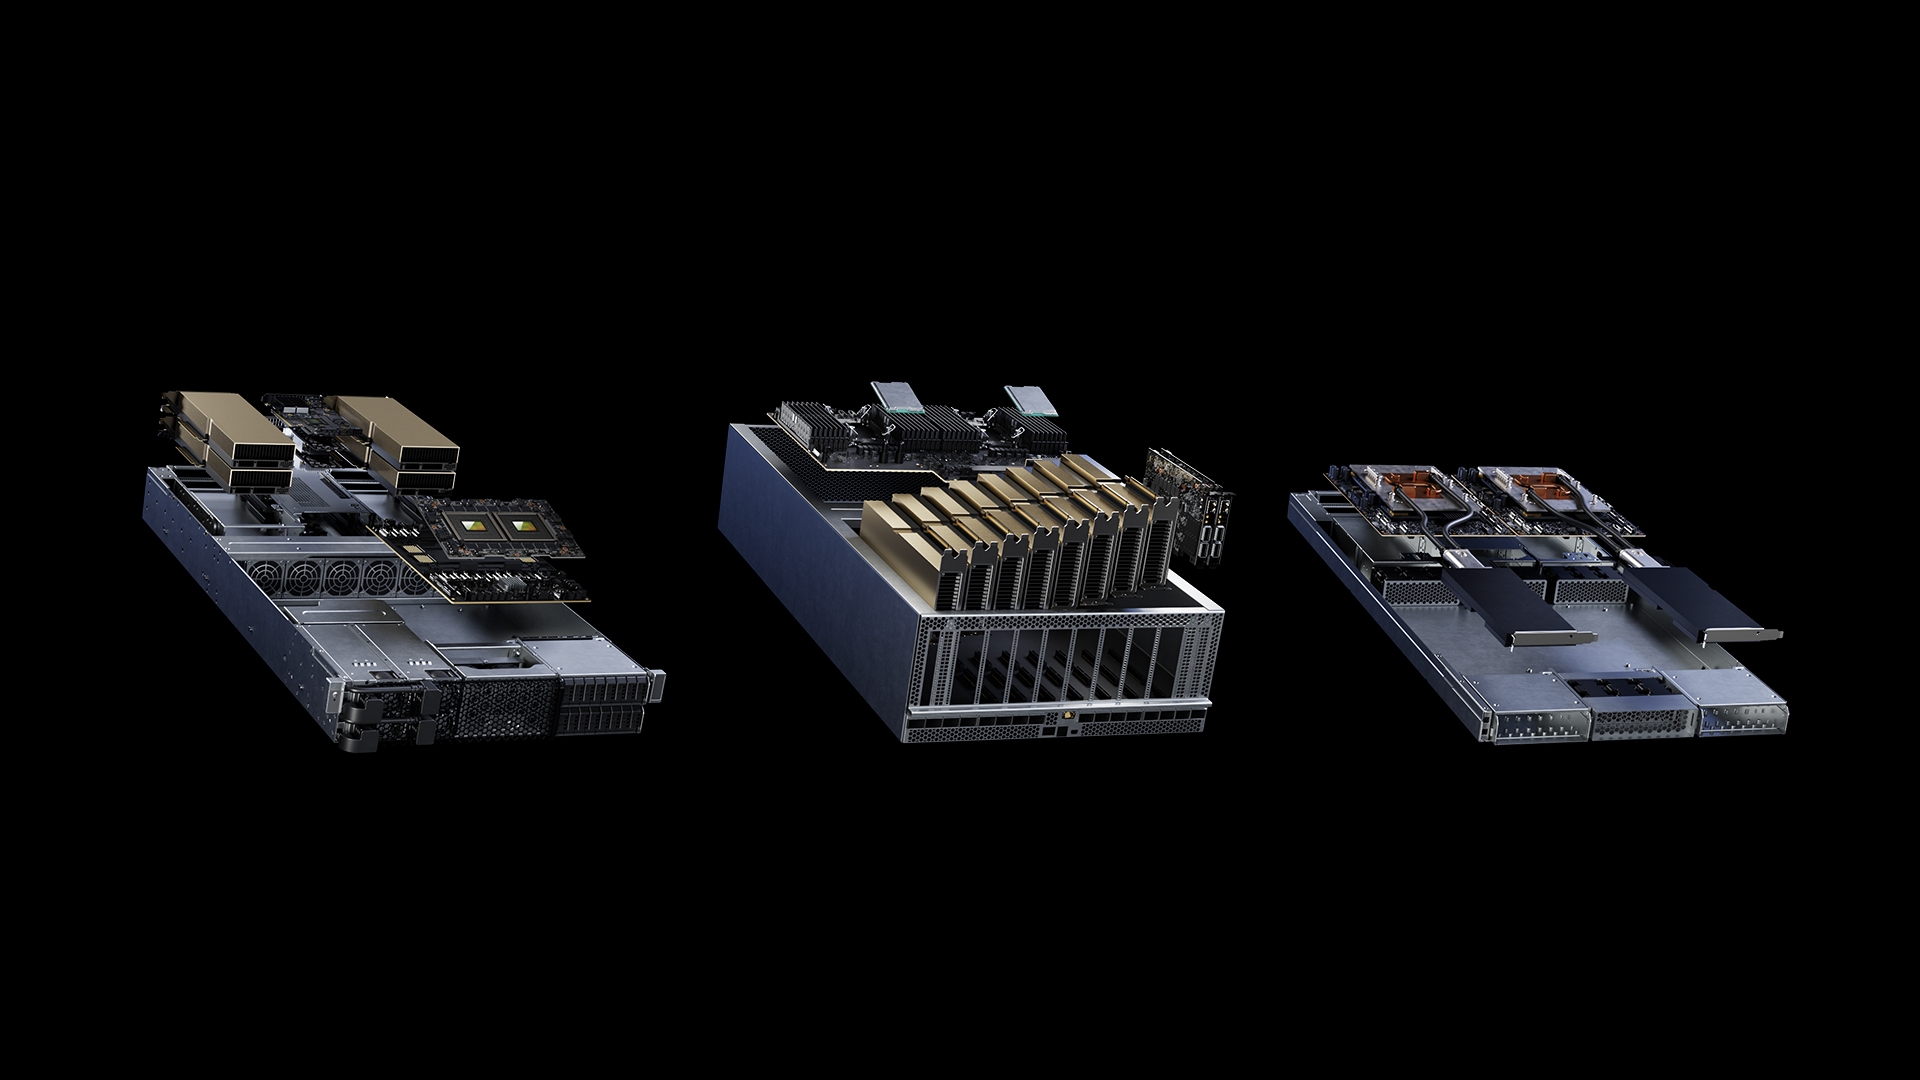 NVIDIA MGX offers system builders a modular architecture to meet the diverse accelerated computing needs of the world's data centers